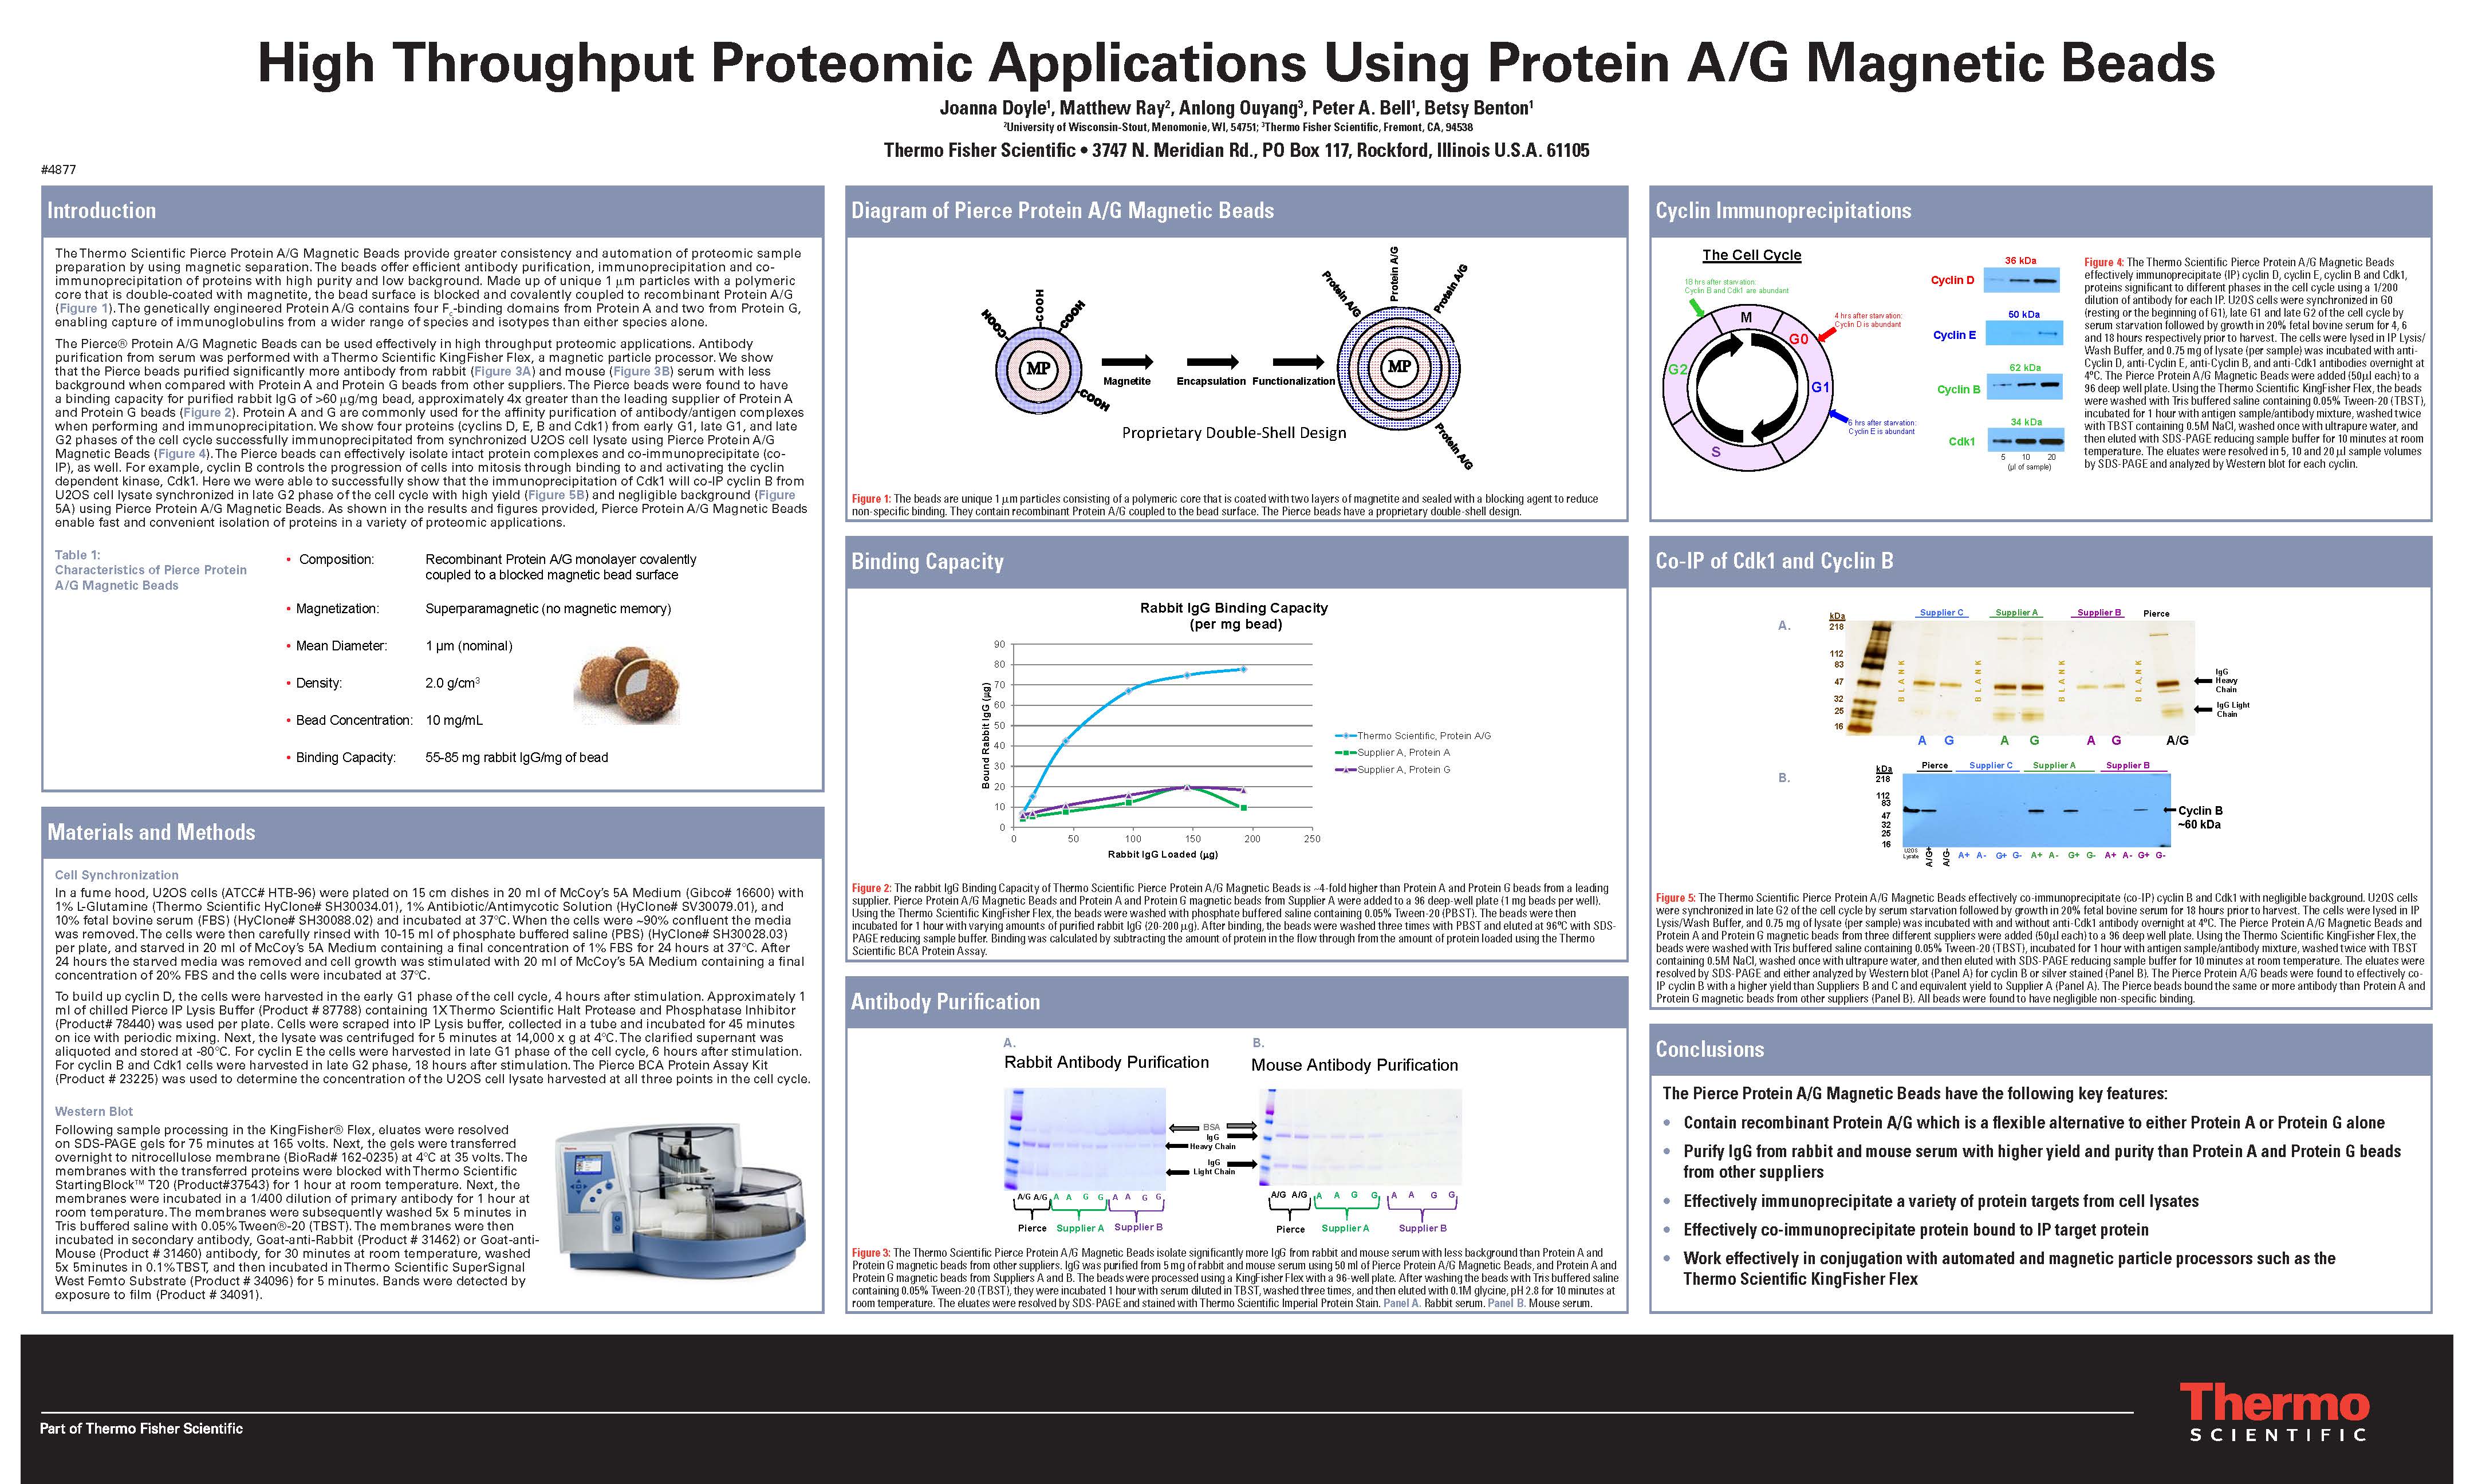 applications using protein A/G magnetic beads – RaySciences